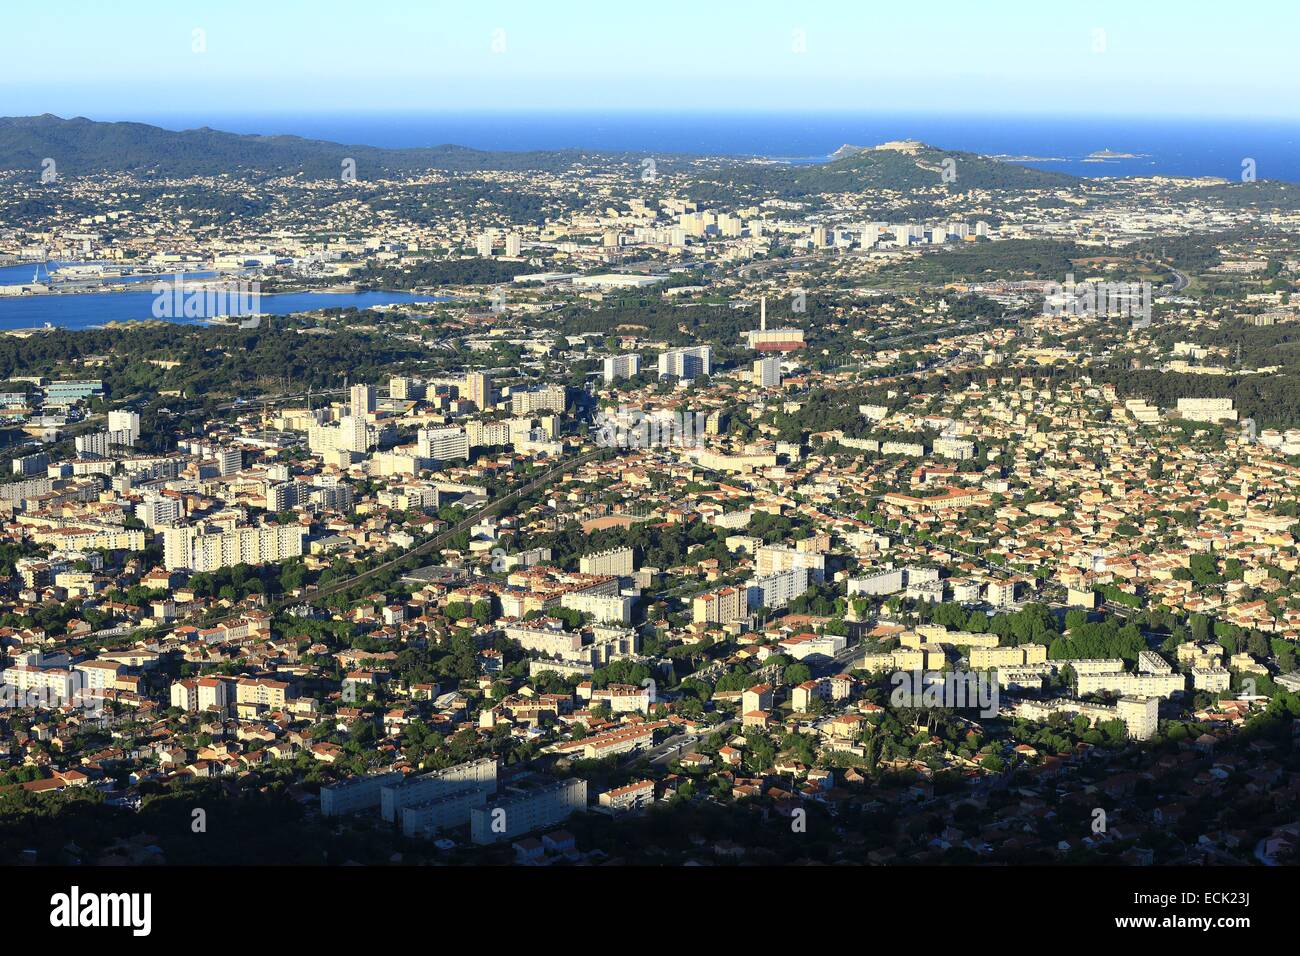 France, Var, Toulon, neighborhoods west from Mount Faron, La Seyne sur Mer and Six Fours beaches in the background Stock Photo